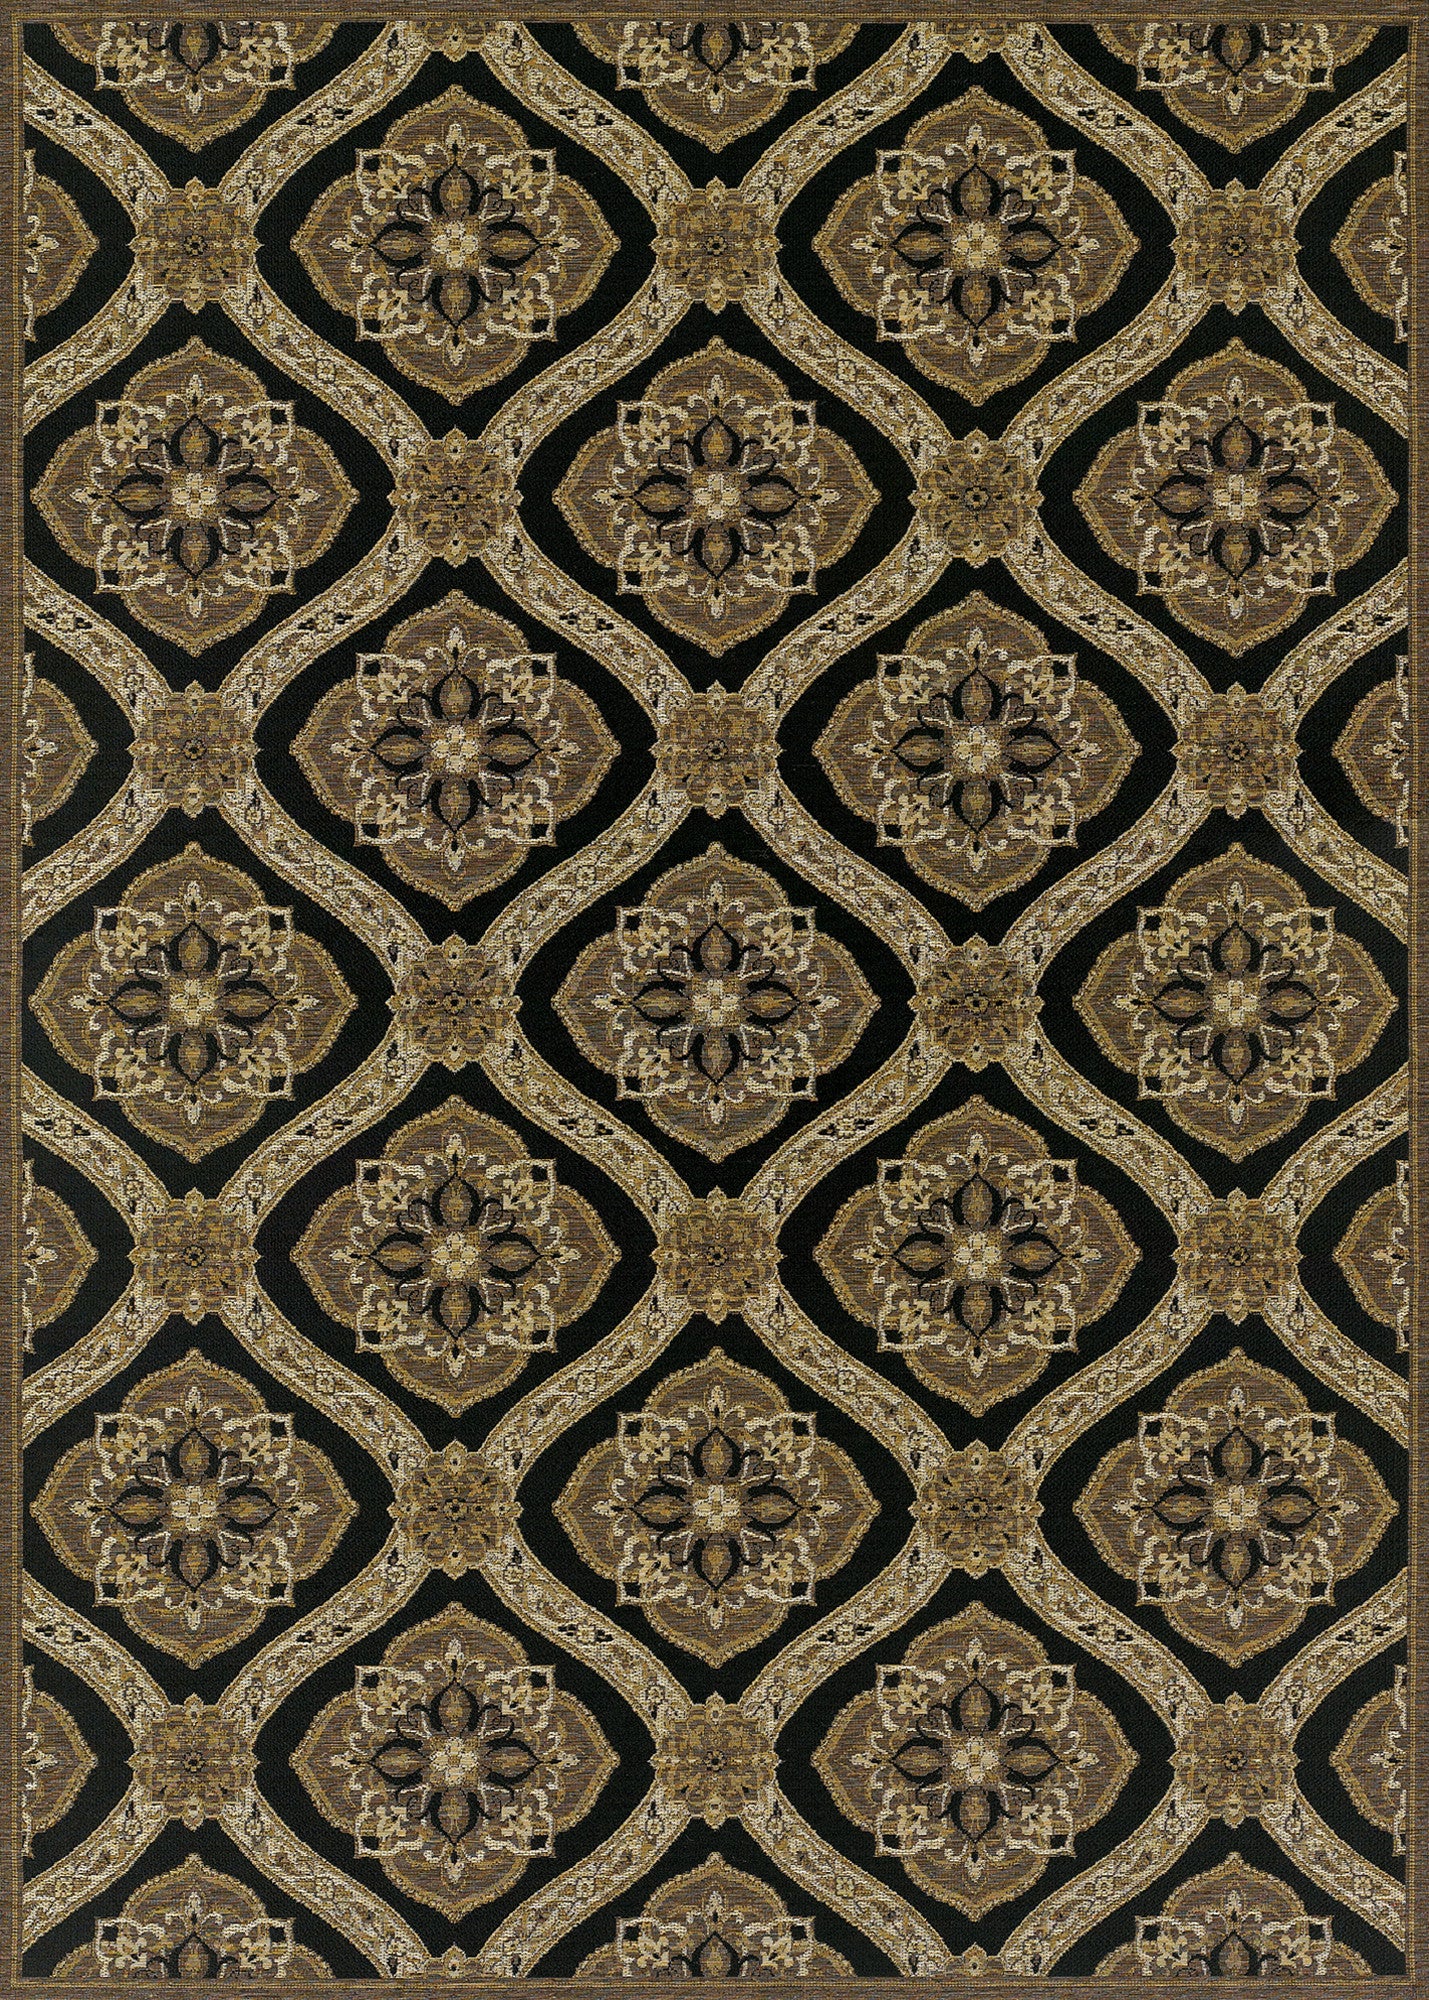 Couristan Dolce Napoli Black/Gold Area Rug